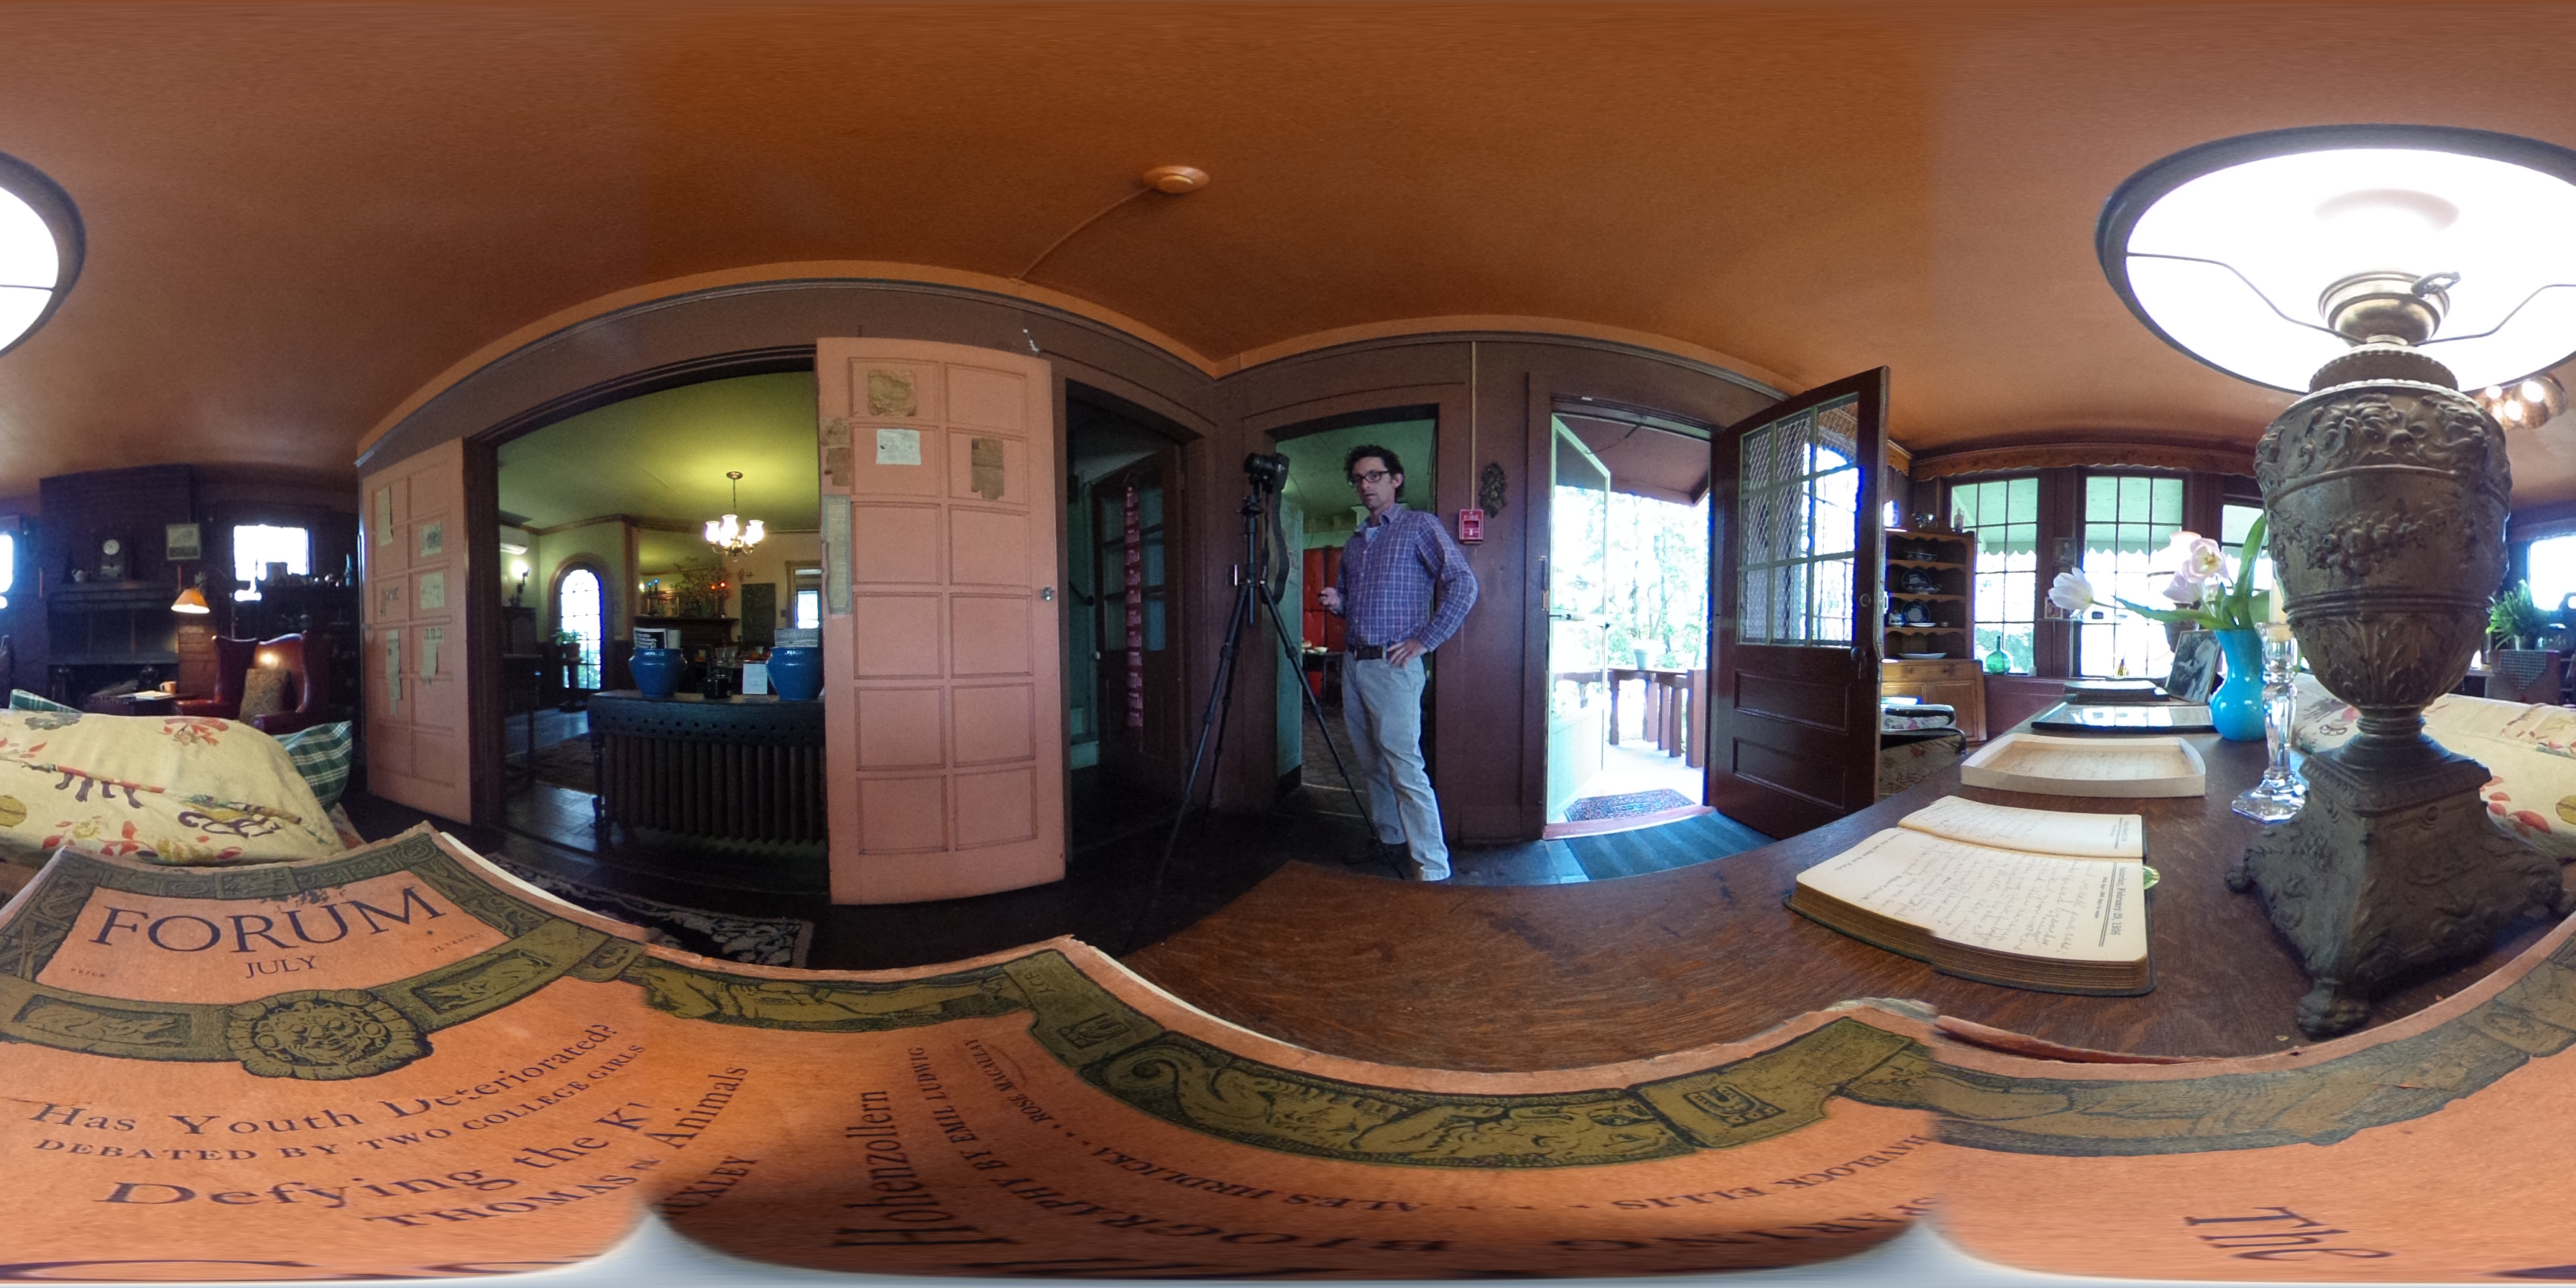 distorted image of a man in an old room